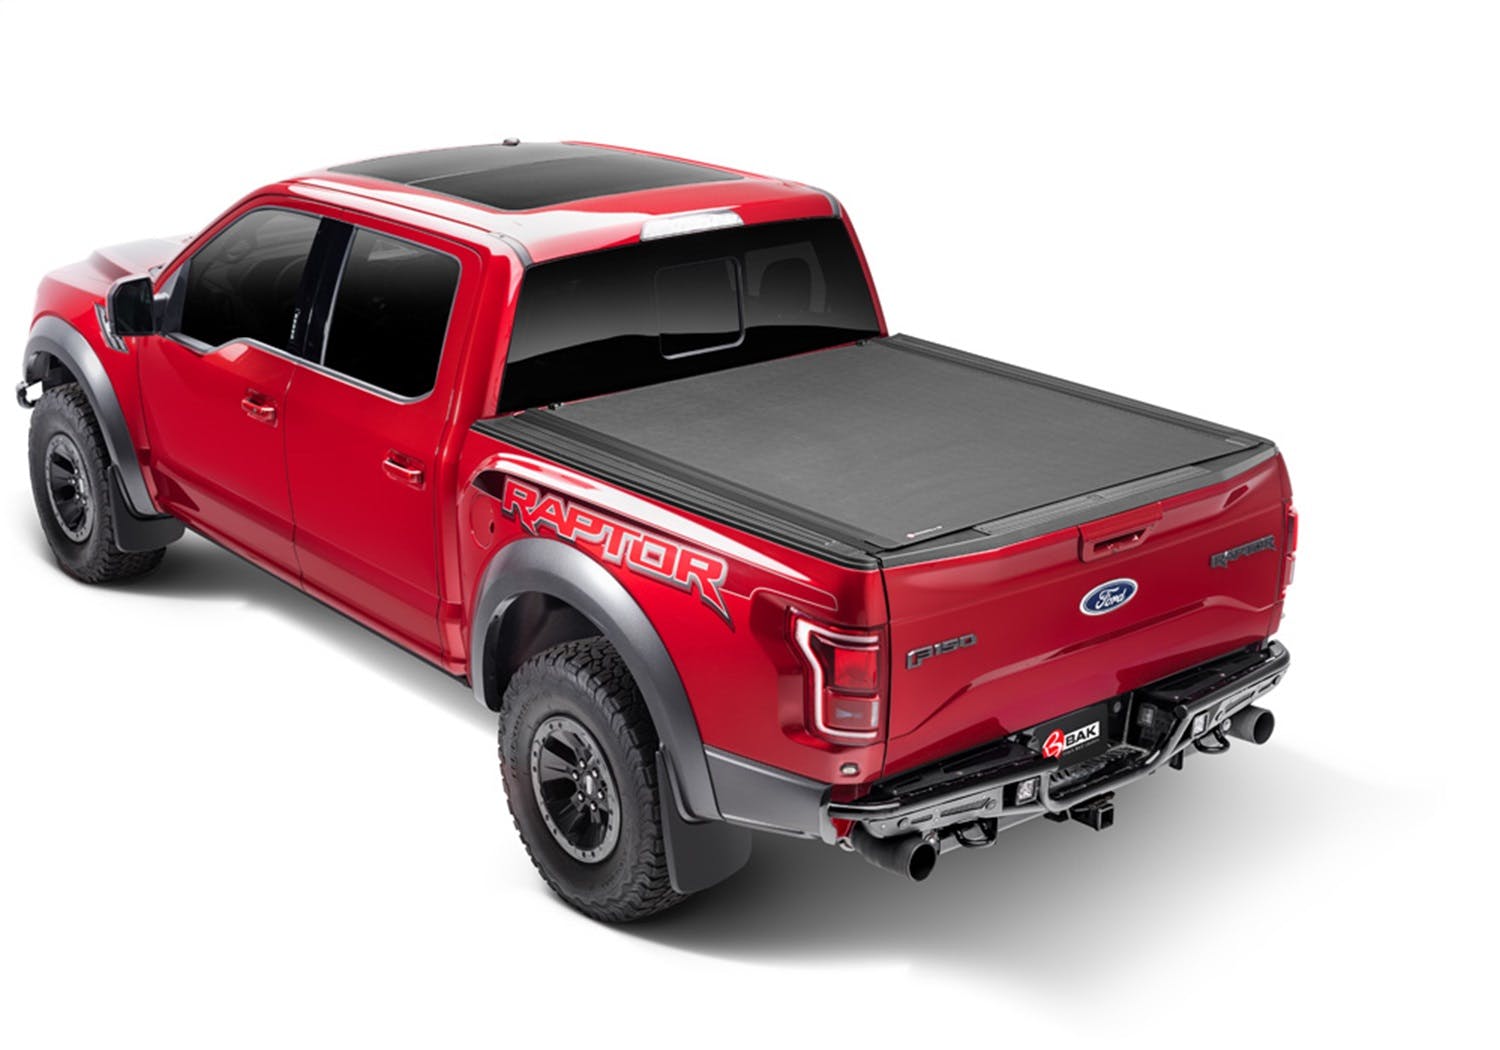 BAK Industries 80311 Revolver X4s Hard Rolling Truck Bed Cover